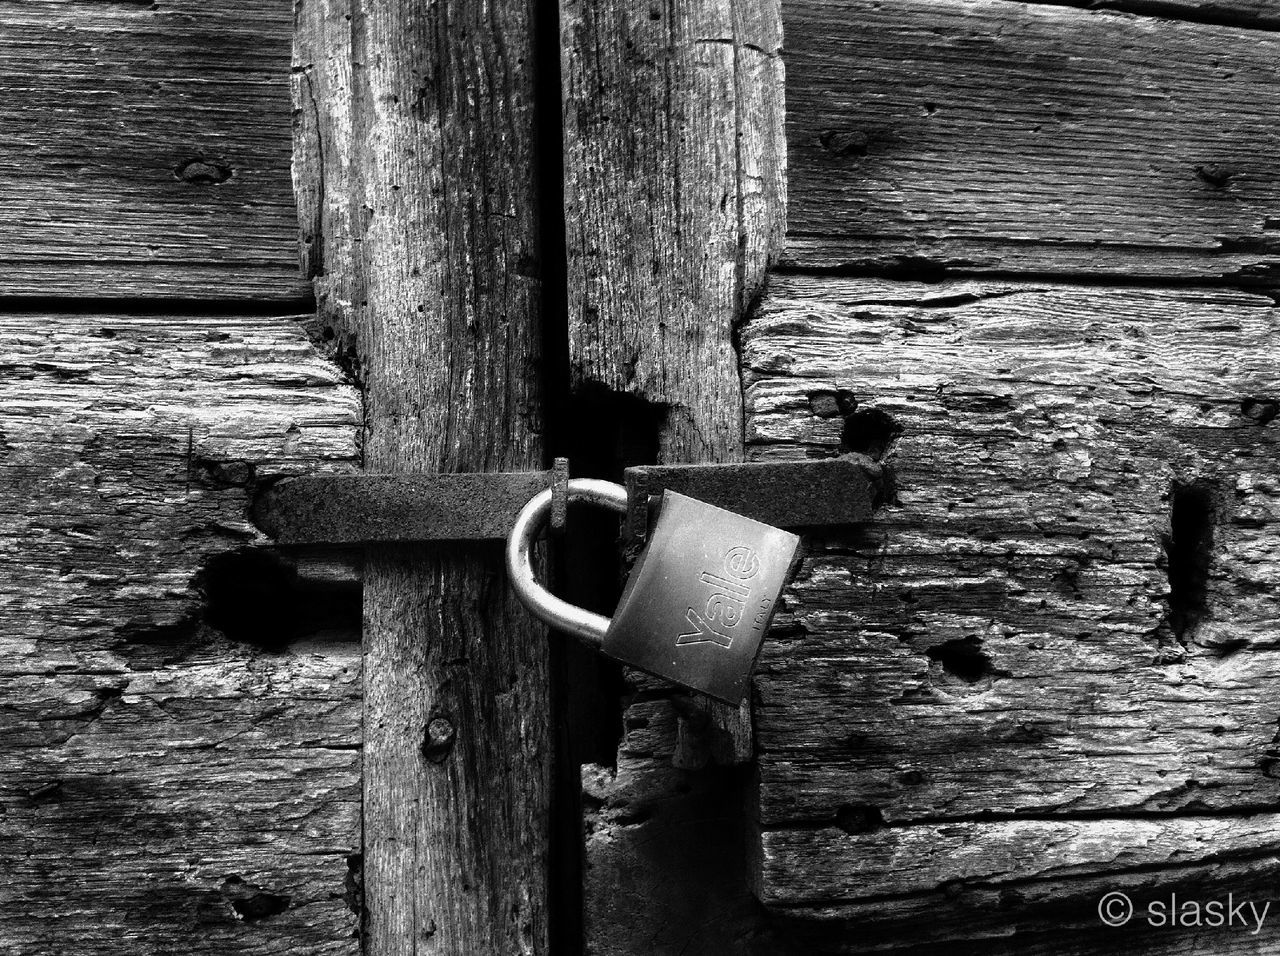 wood - material, close-up, old, wooden, metal, rusty, wood, lock, safety, focus on foreground, padlock, protection, security, weathered, textured, communication, day, outdoors, no people, plank